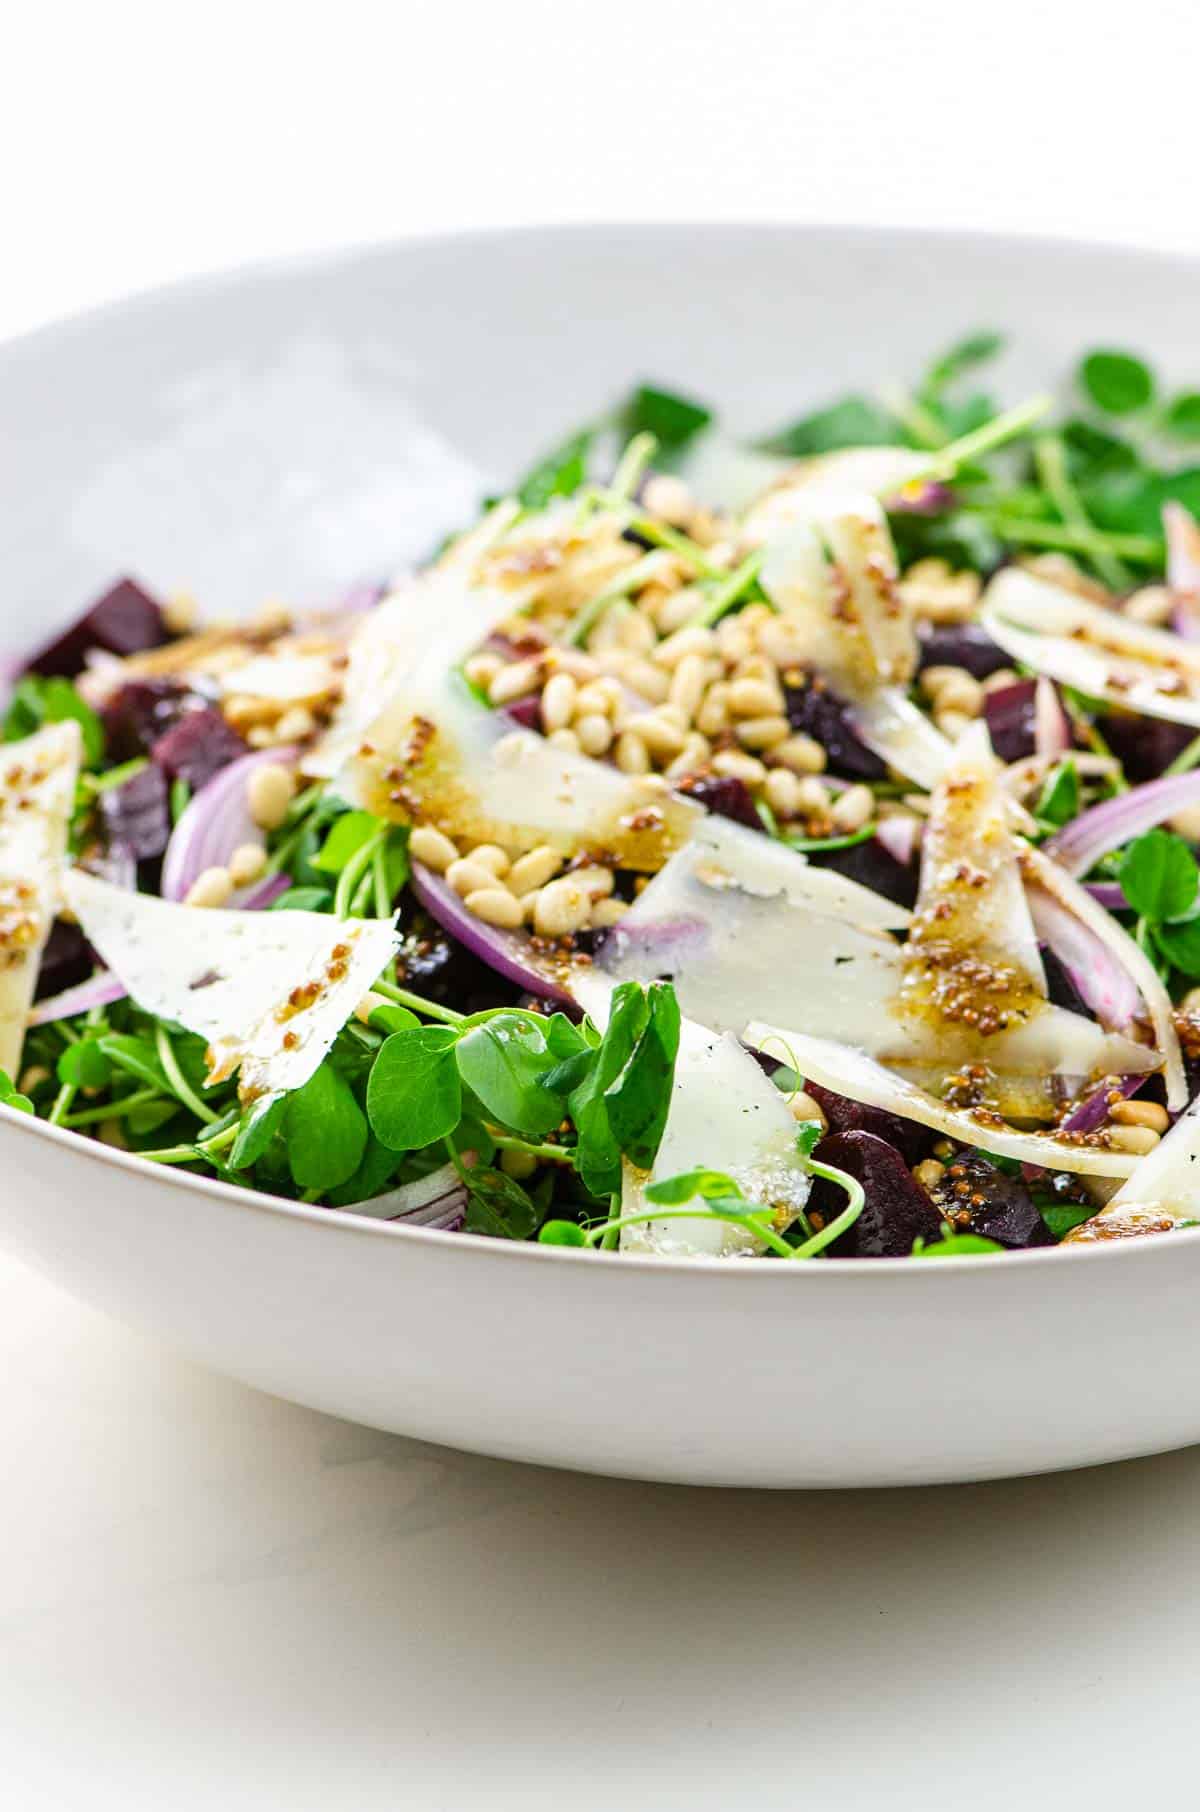 pea shoot salad with manchego, pine nuts, beets, and red onion in a white bowl